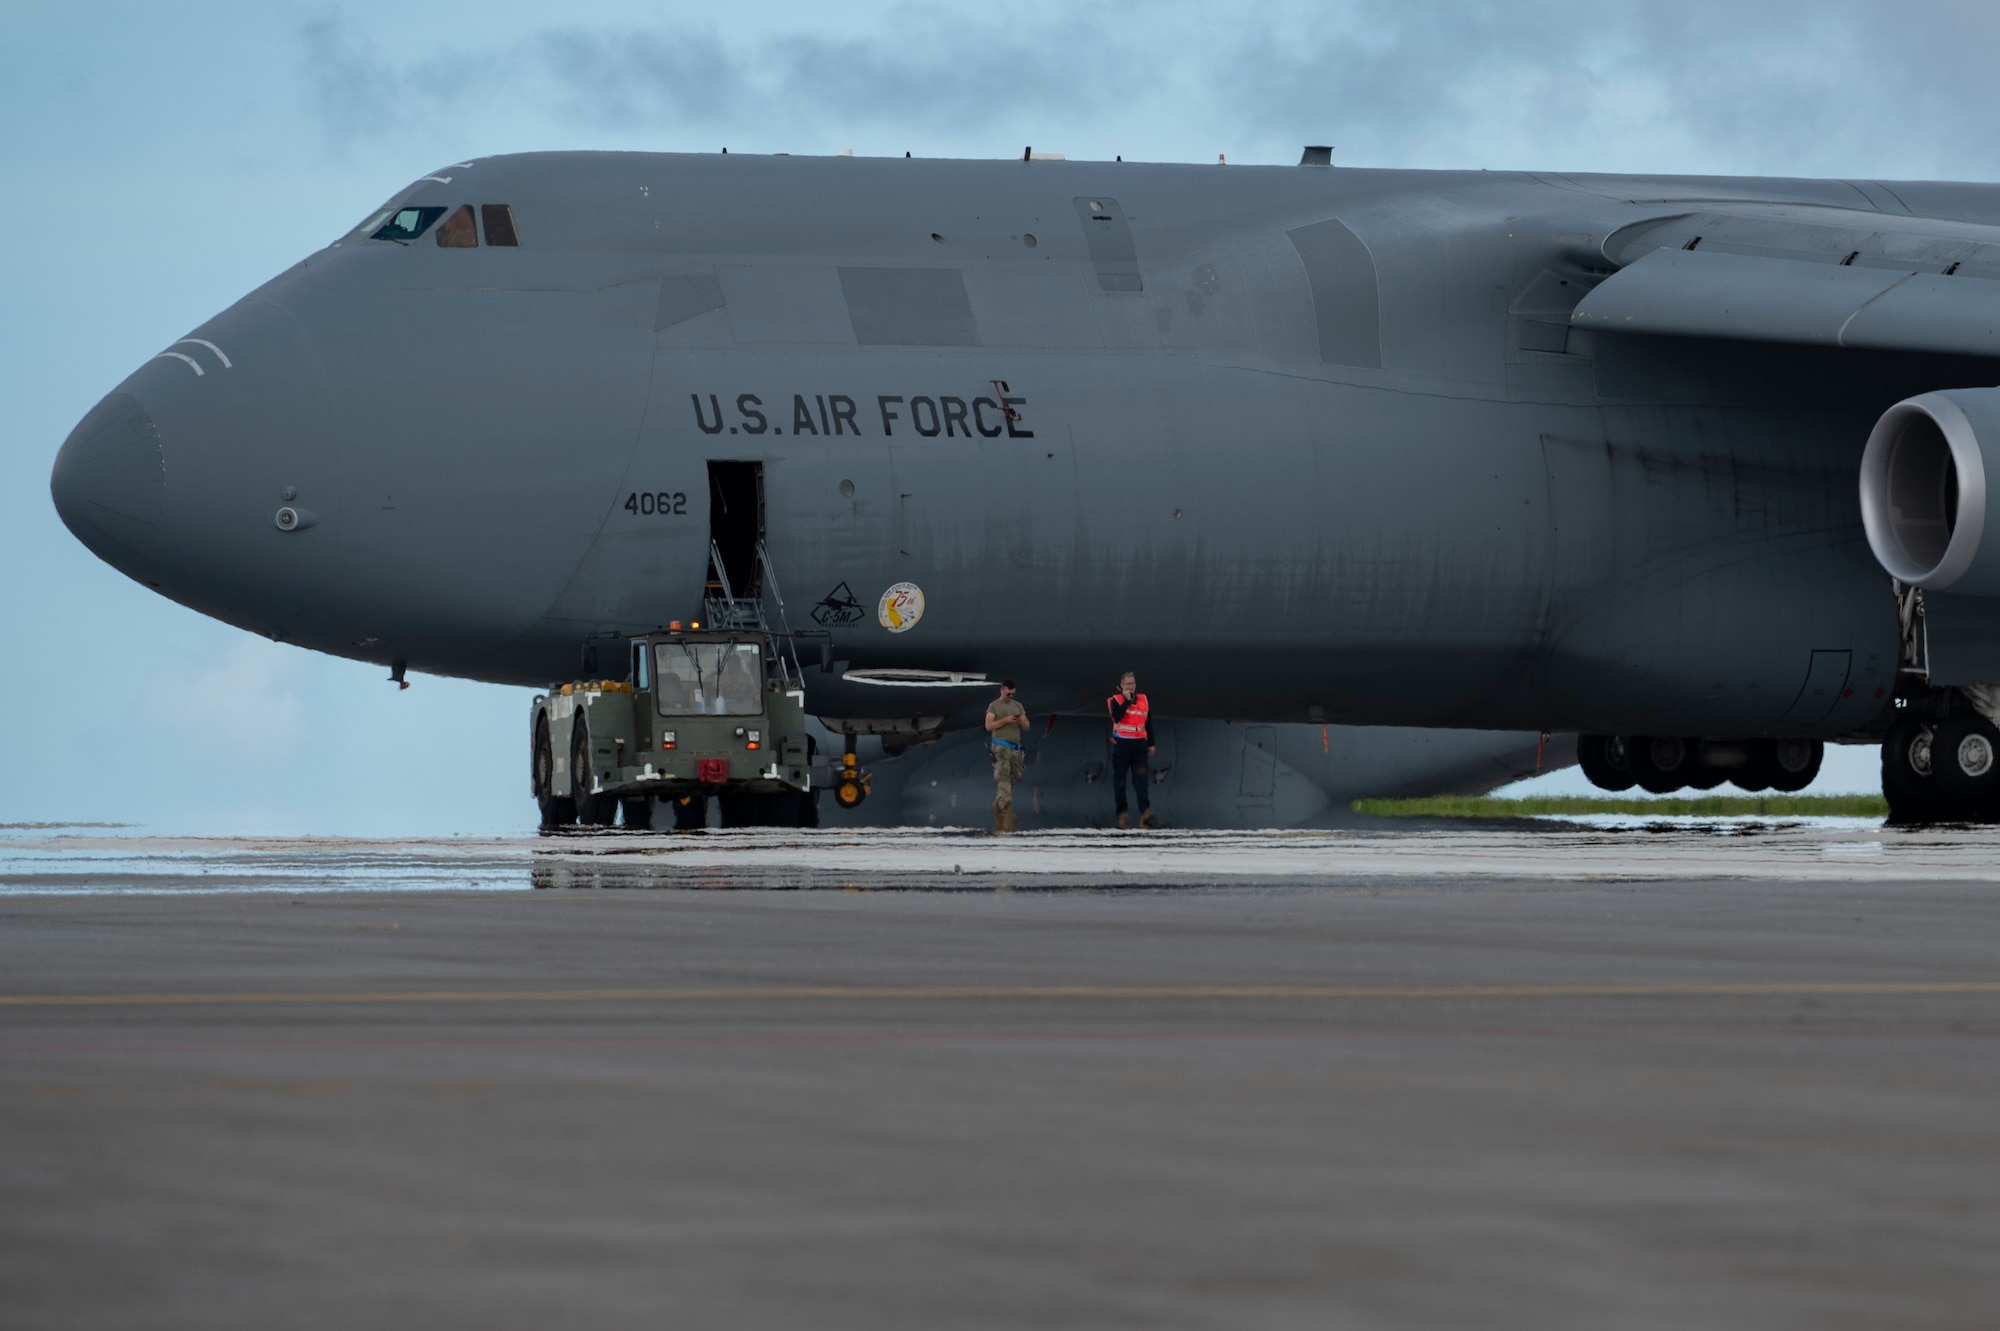 U.S. Air Force Airmen assigned to the 734th Air Mobility Squadron, Andersen Air Force Base, Guam, tow a U.S. Air Force C-5M Super Galaxy, July 13, 2022 at Andersen AFB. A team of instructors assigned to the 515th Air Mobility Operation Wing, Joint Base Pearl Harbor-Hickam, Hawaii, trained Airmen assigned at Andersen AFB on aircraft towing, jacking, and air force specialty code specific training. During this training, Airmen not specifically assigned to the C-5 received training and familiarization of the systems and capabilities of the aircraft. (U.S. Air Force Photo by Airman 1st Class Emily Saxton)